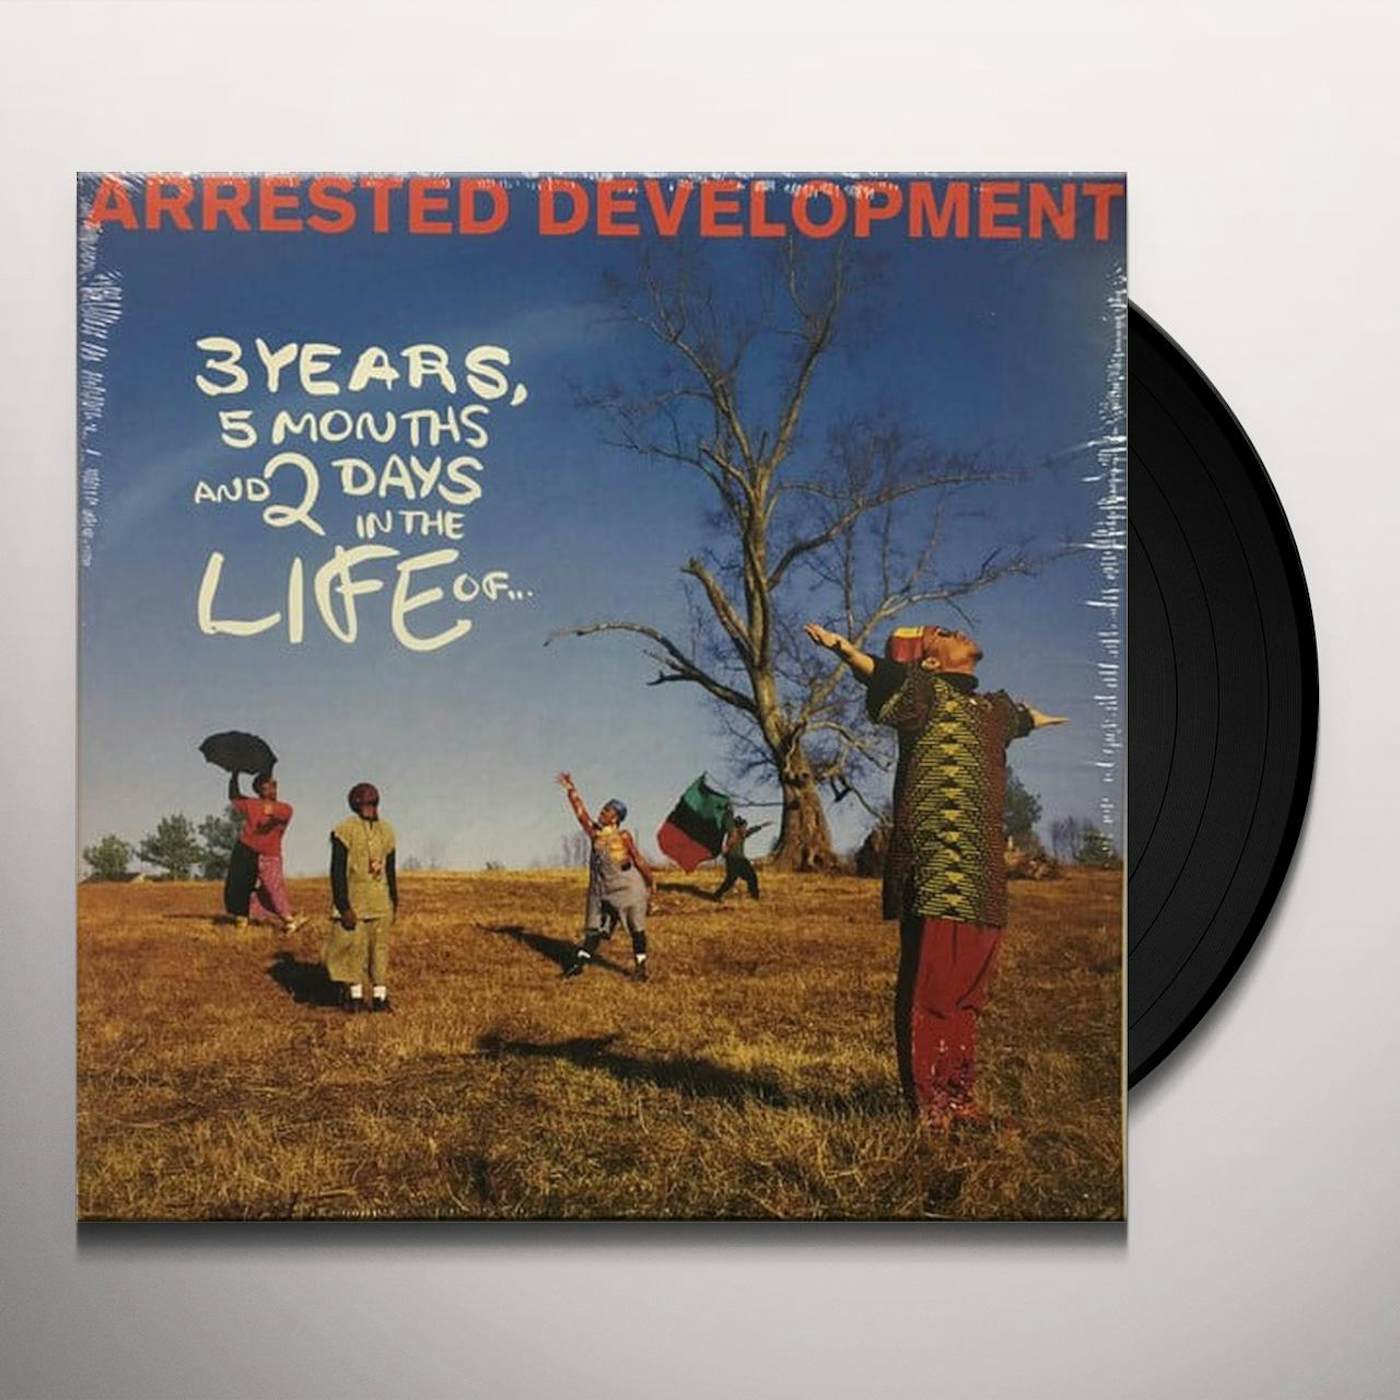 Arrested Development 3 YEARS 5 MONTHS & 2 DAYS IN THE LIFE OF Vinyl Record